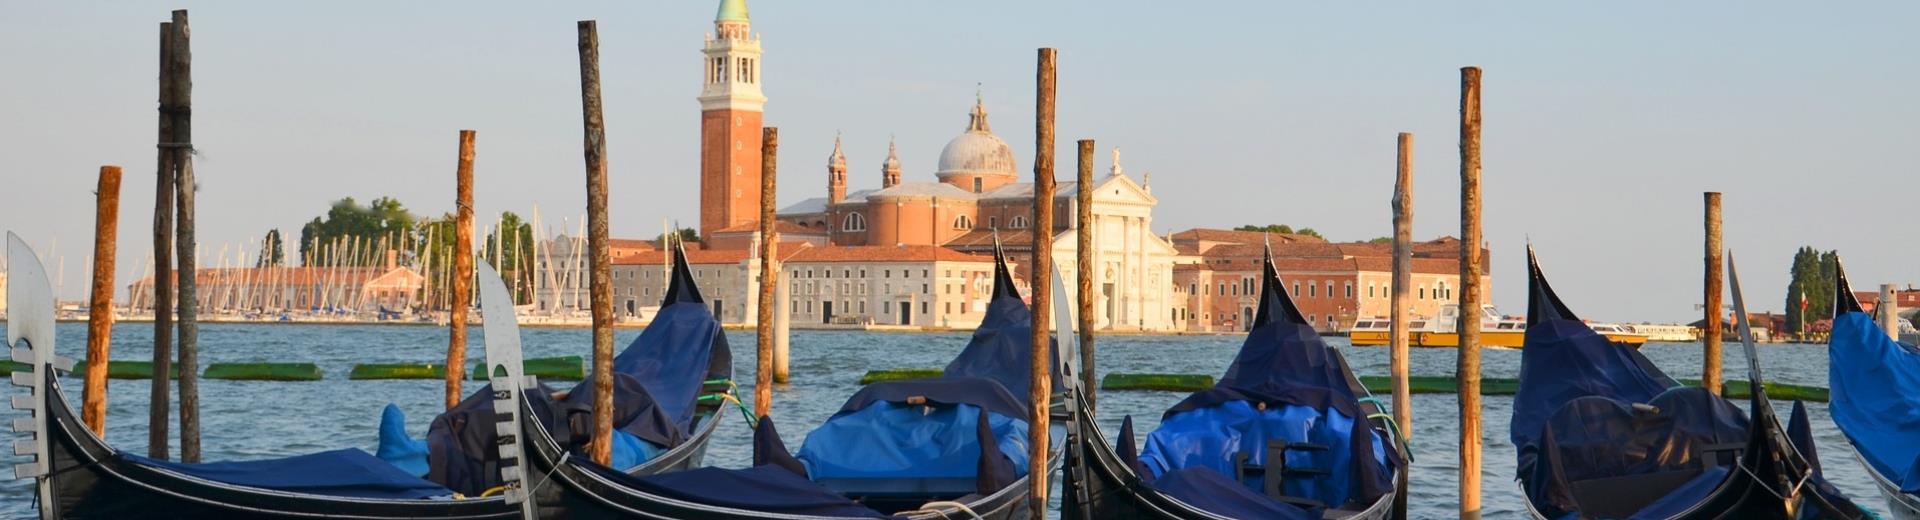 Stays the Best Western Plus Hotel Galileo and visit Venice, less than half an hour!